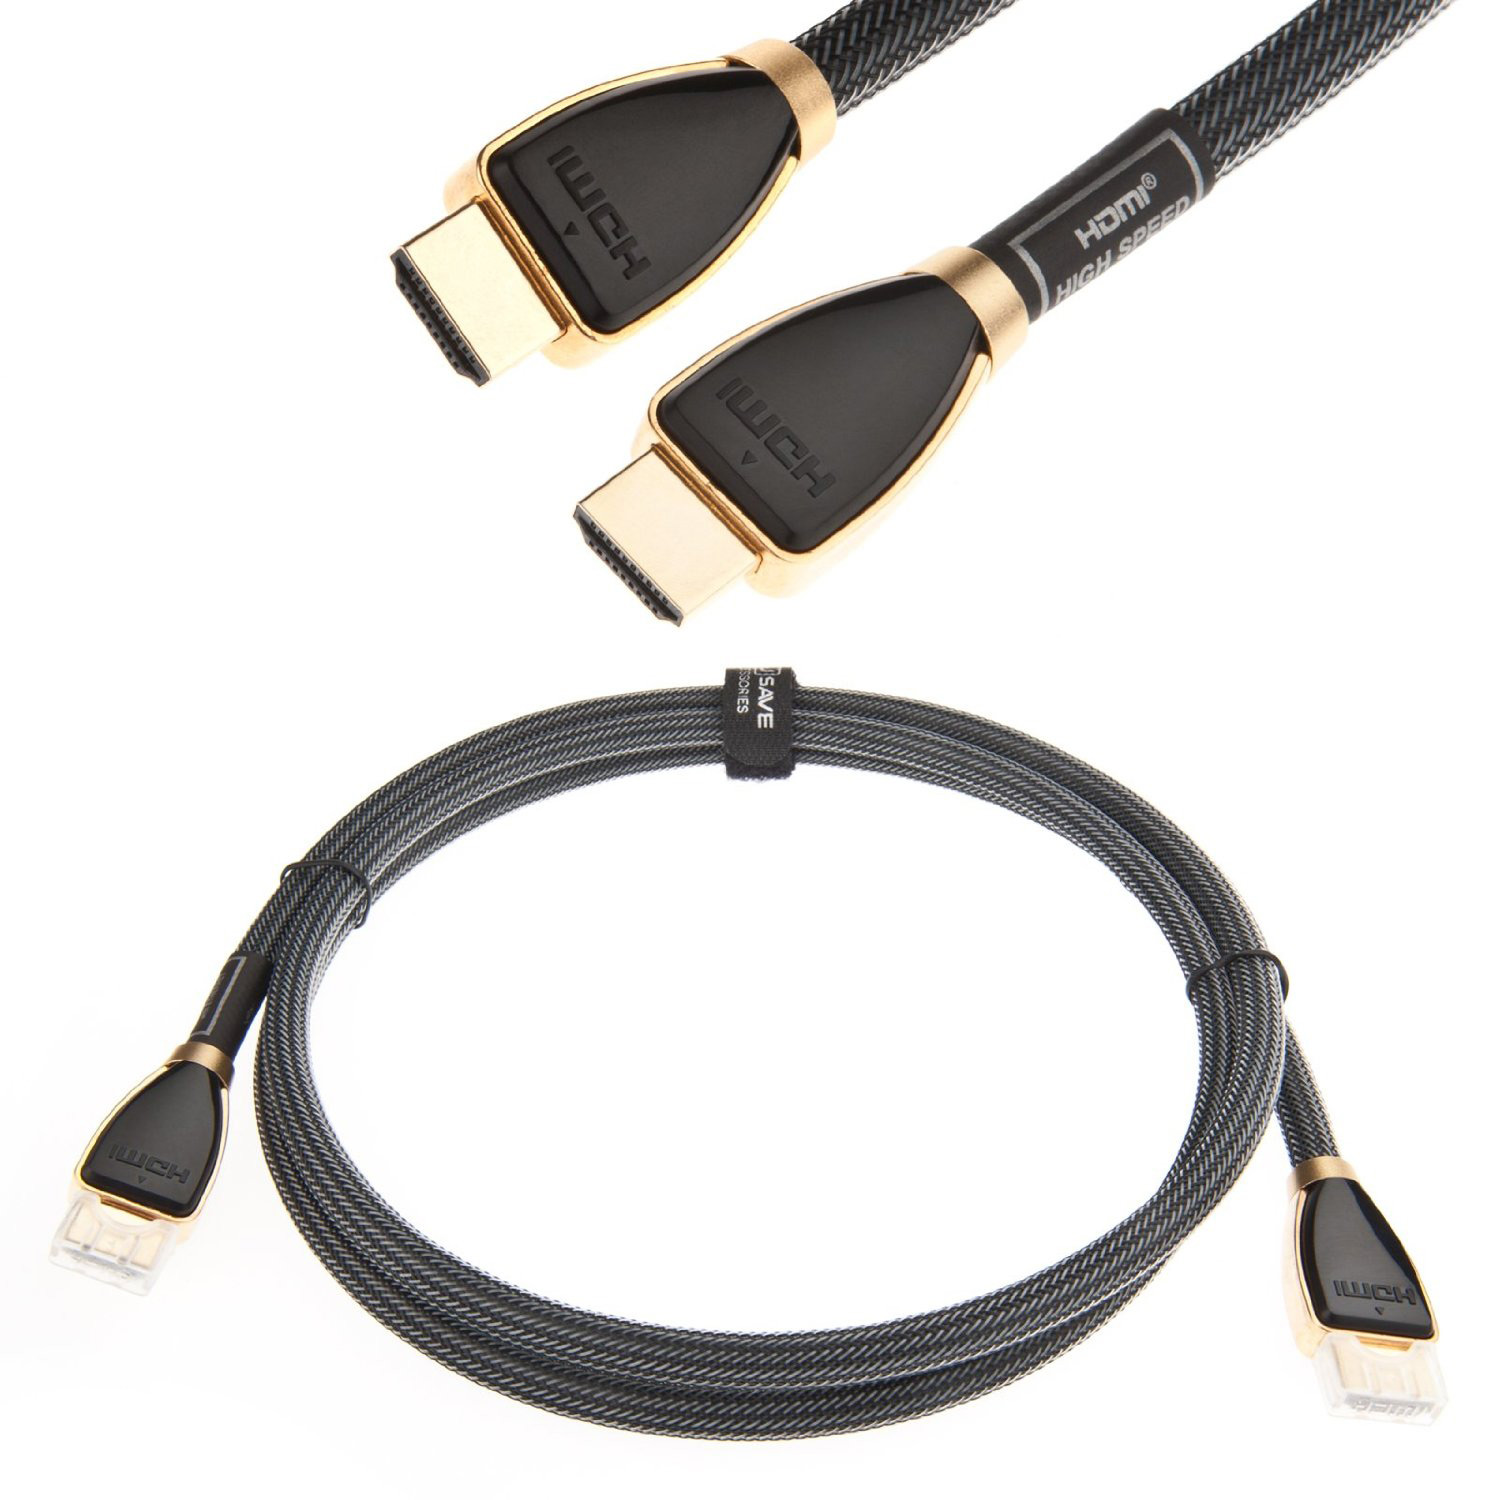 YouSave Accessories Accessories HDMI Cable 1m Gold Connectors